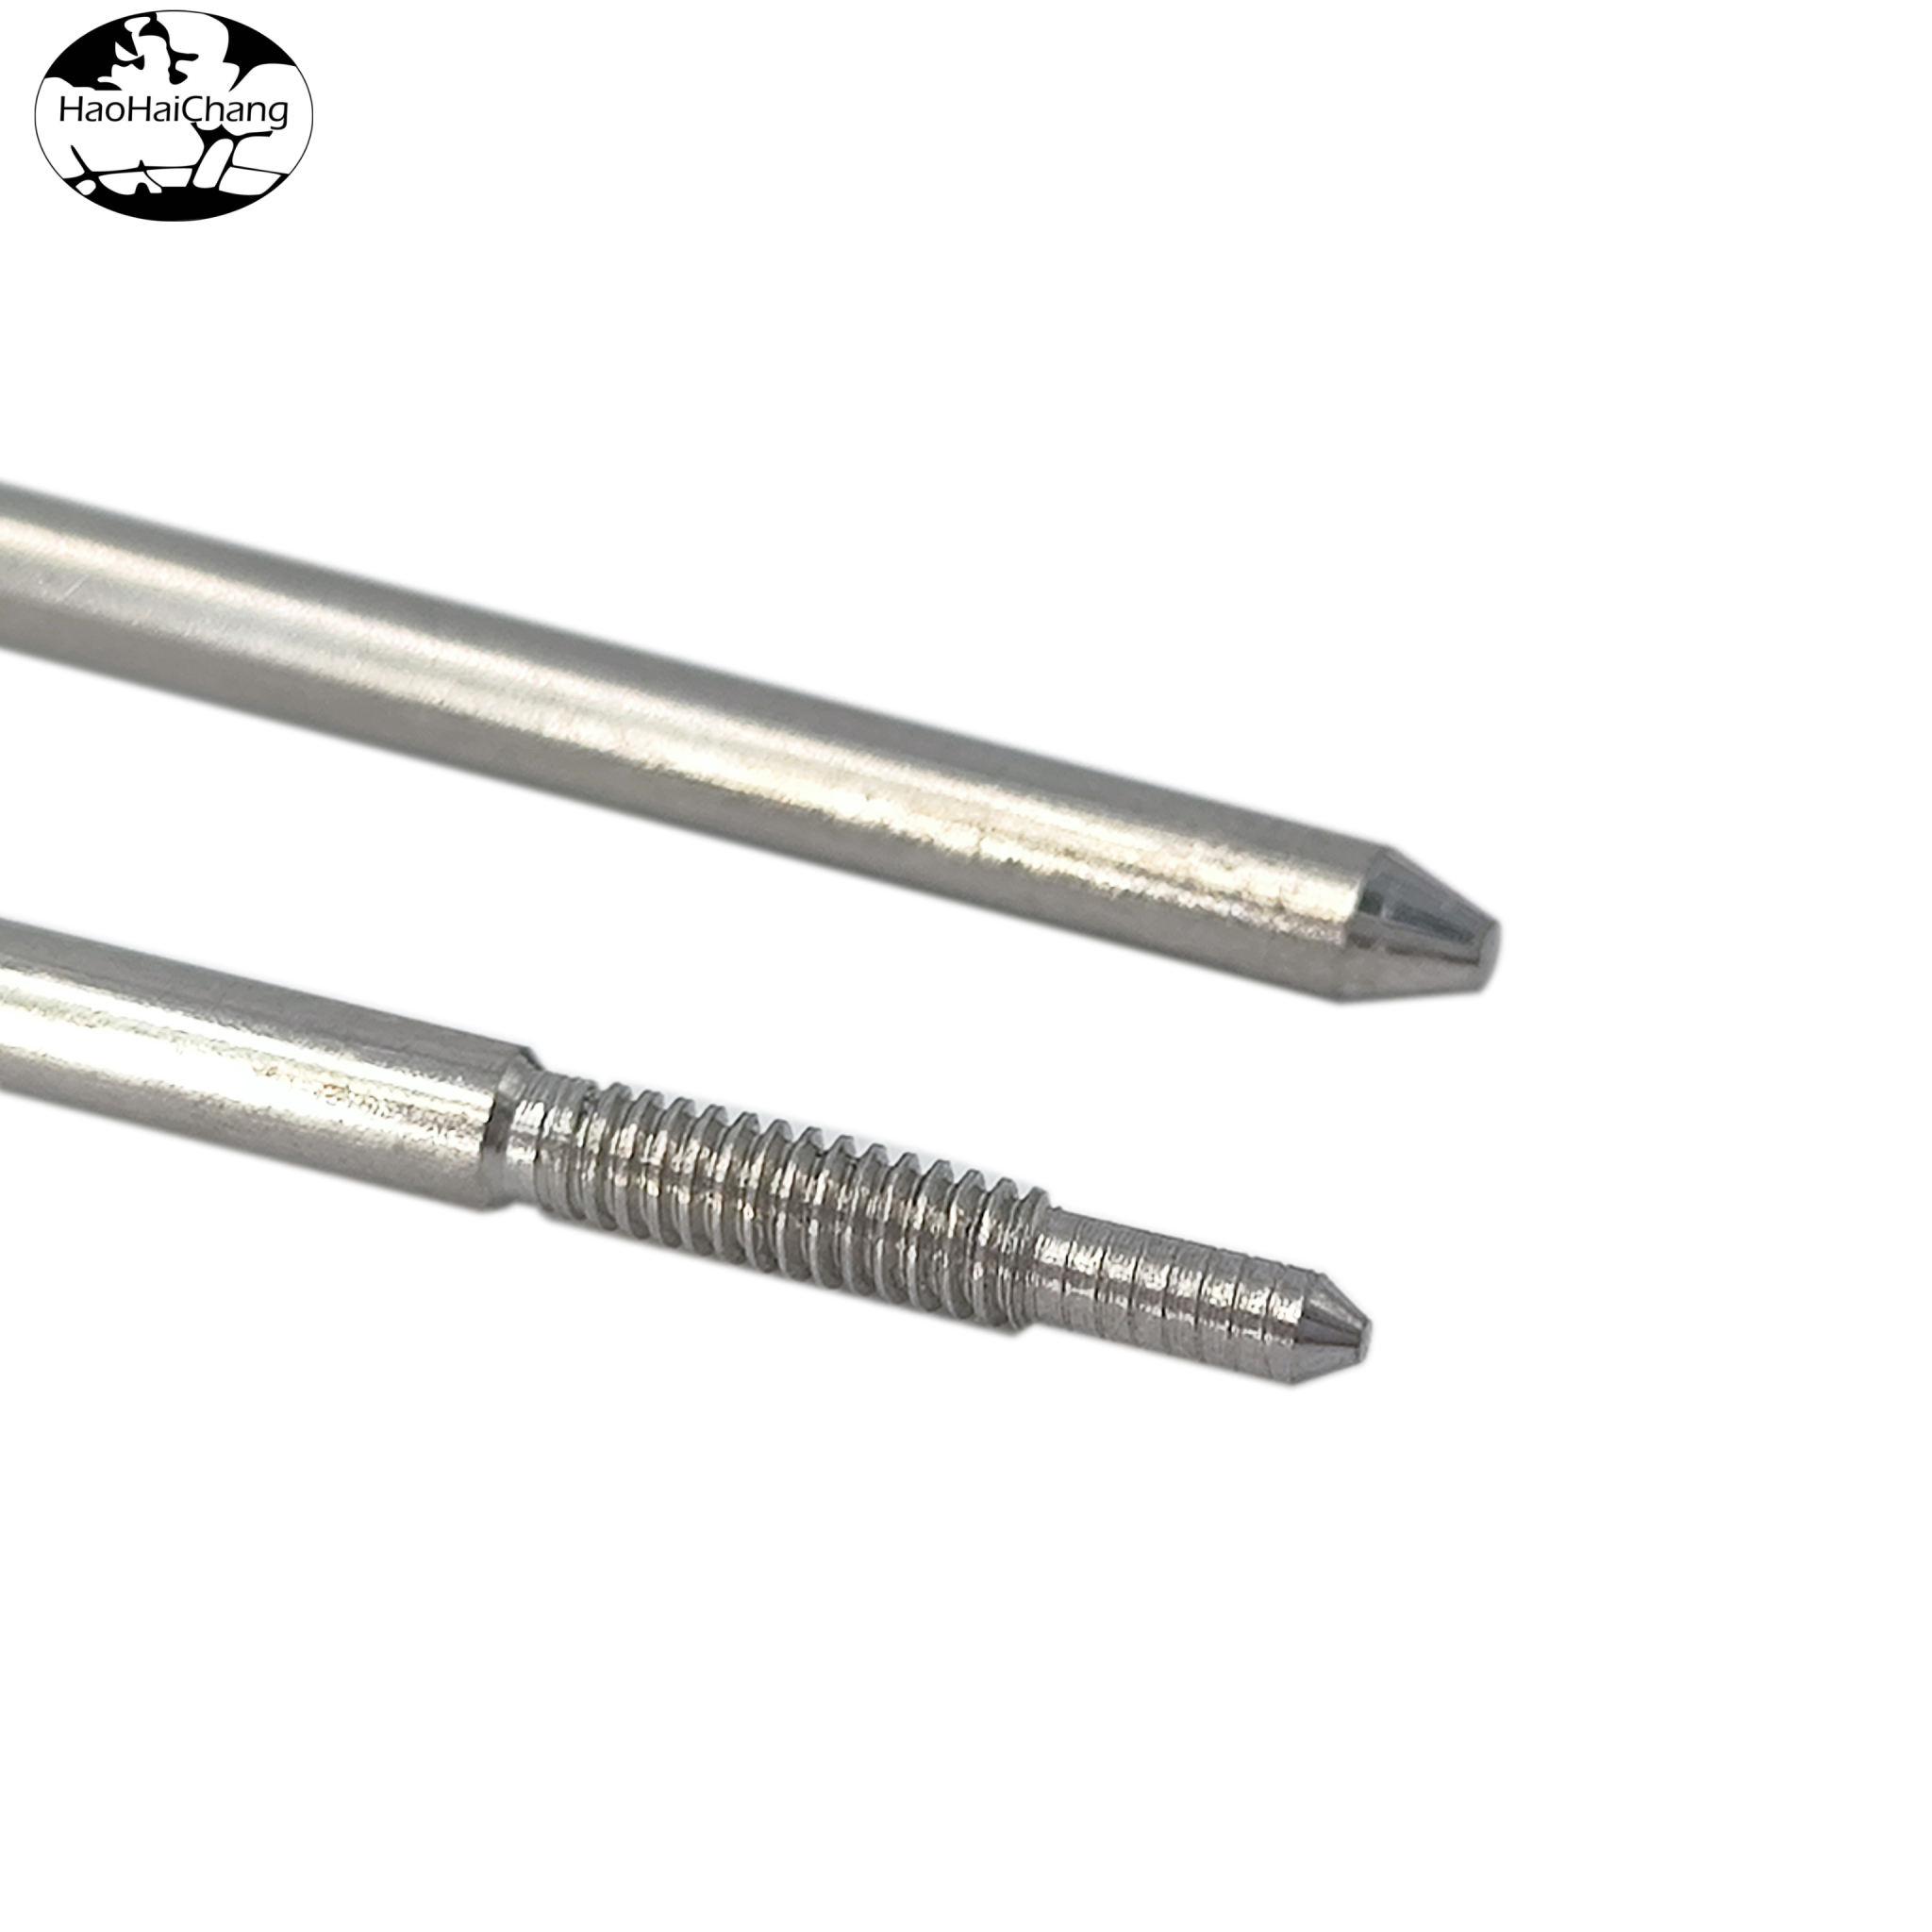 HHC-504 Electric Heating Tube Stainless Steel Threaded Lower Lead Rod